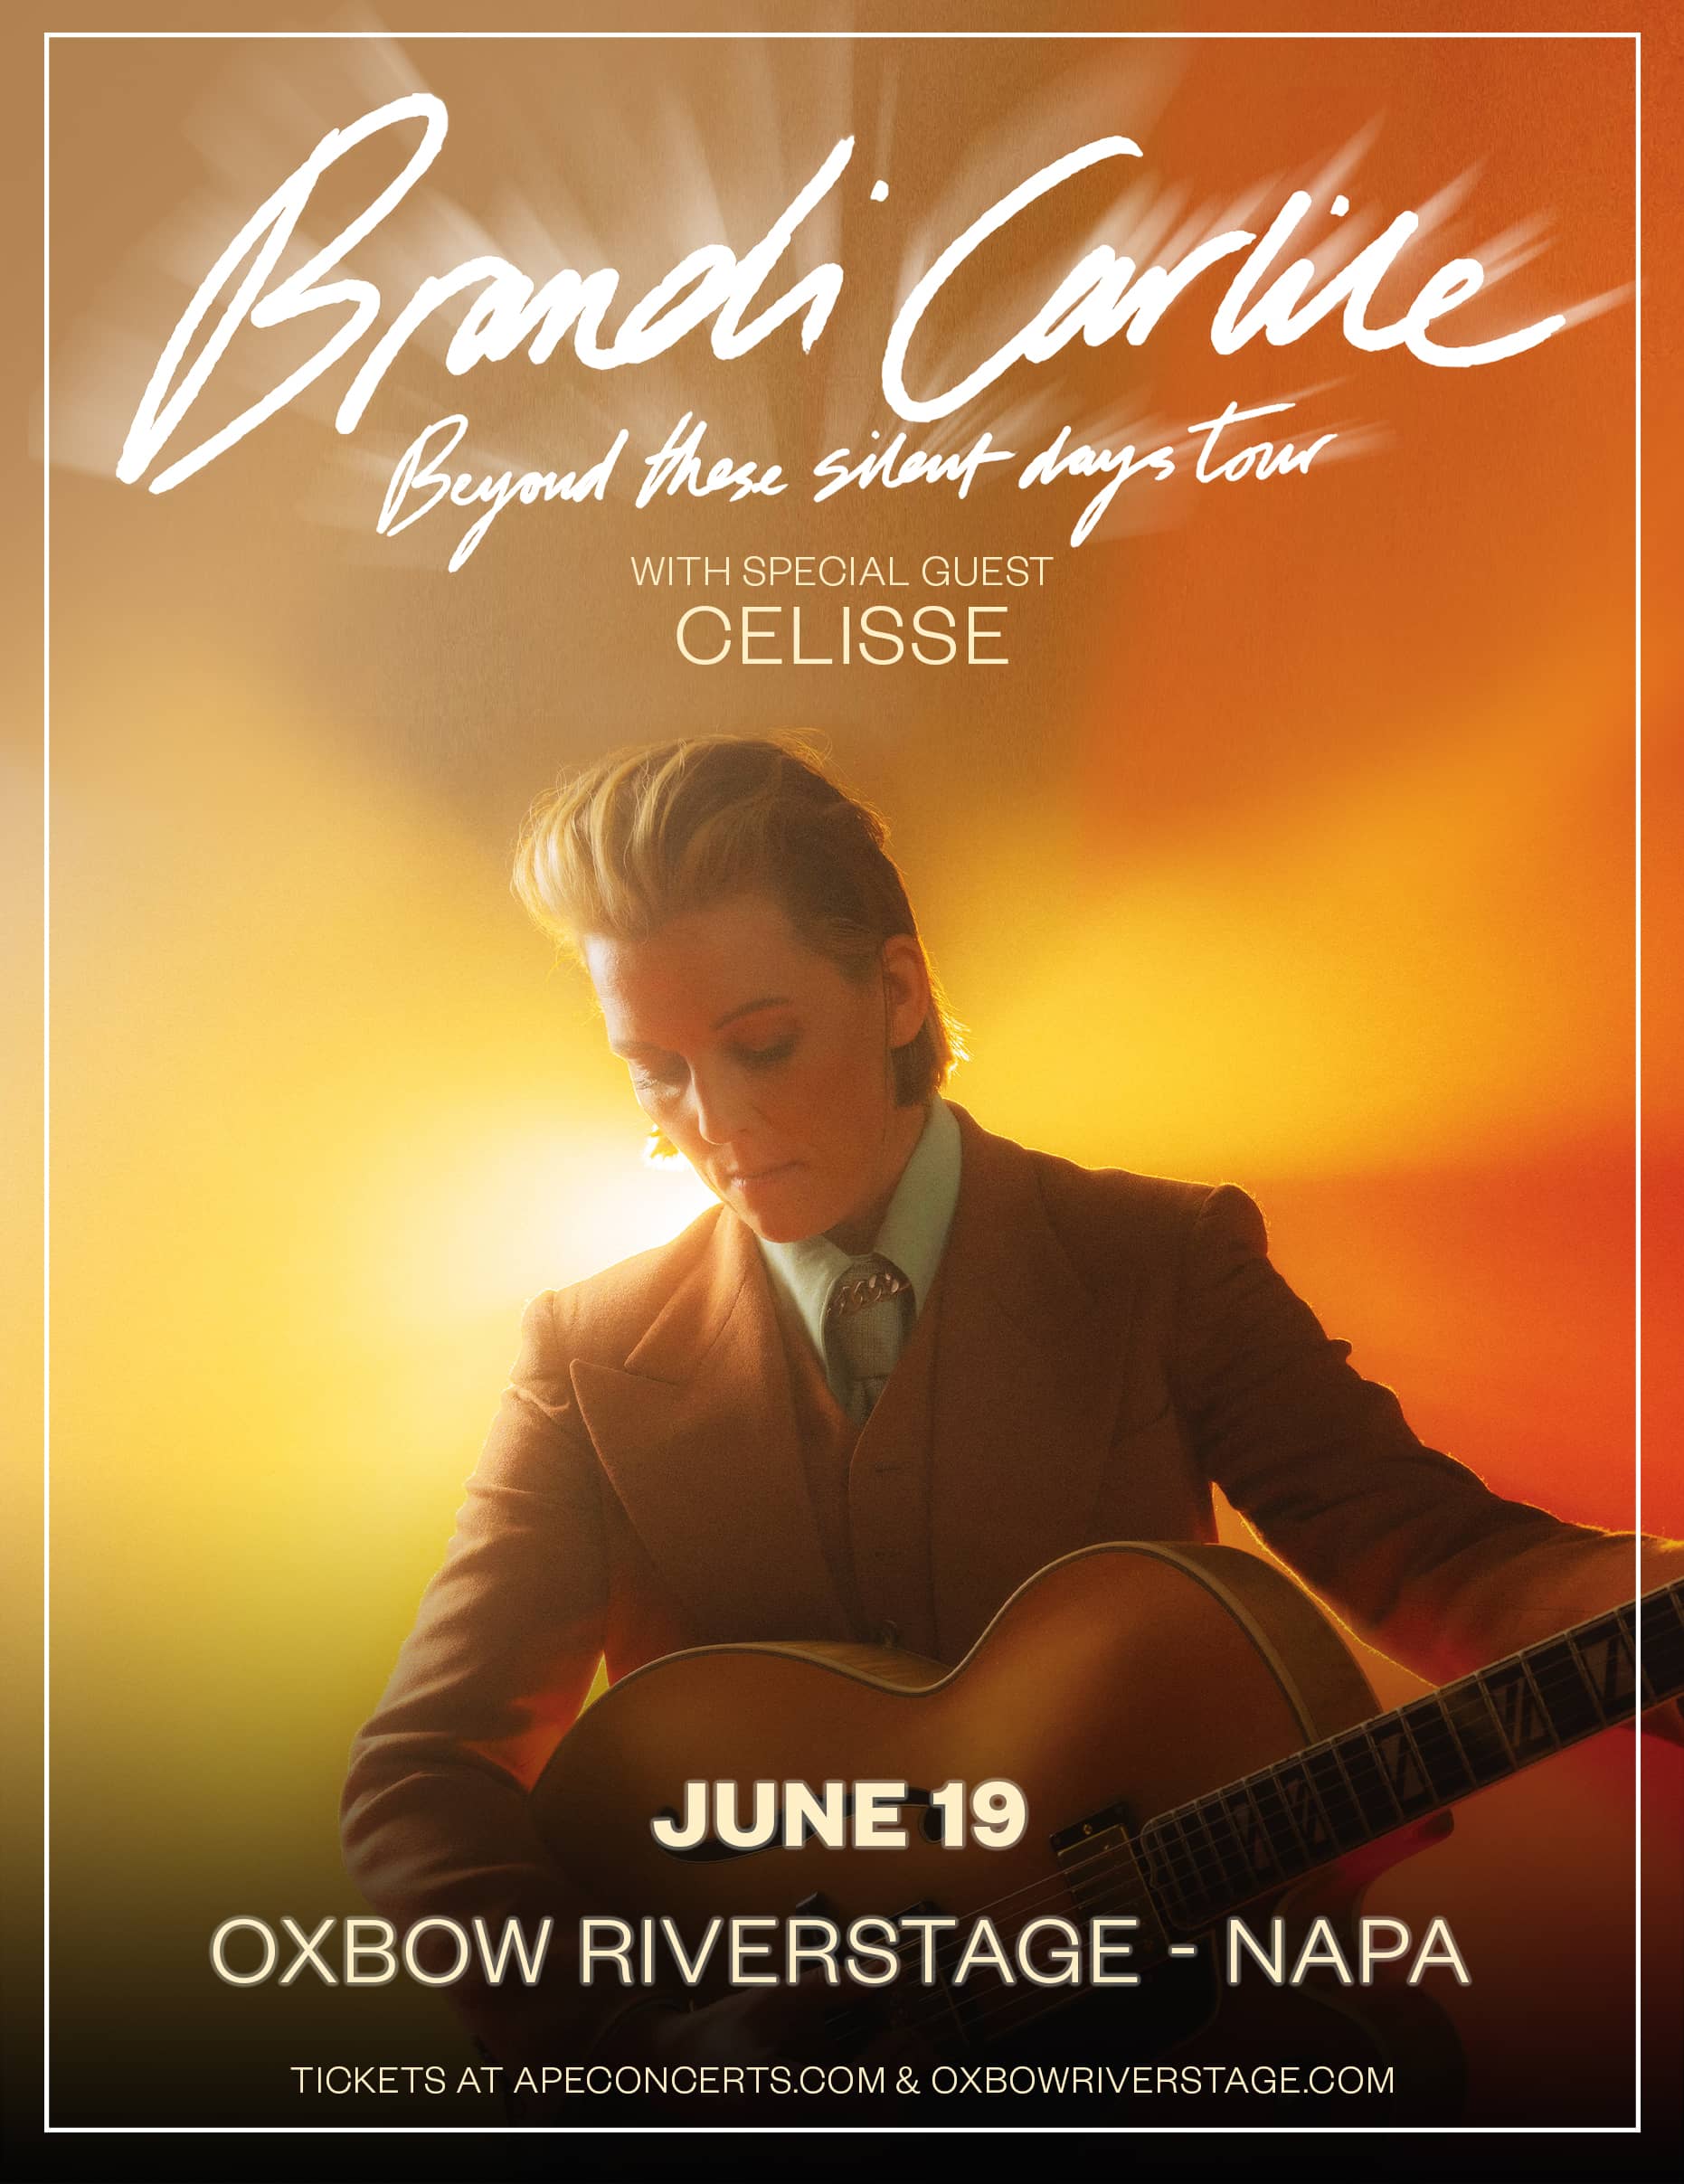 Brandi Carlile with special guest Celisse at Oxbow RiverStage June 19